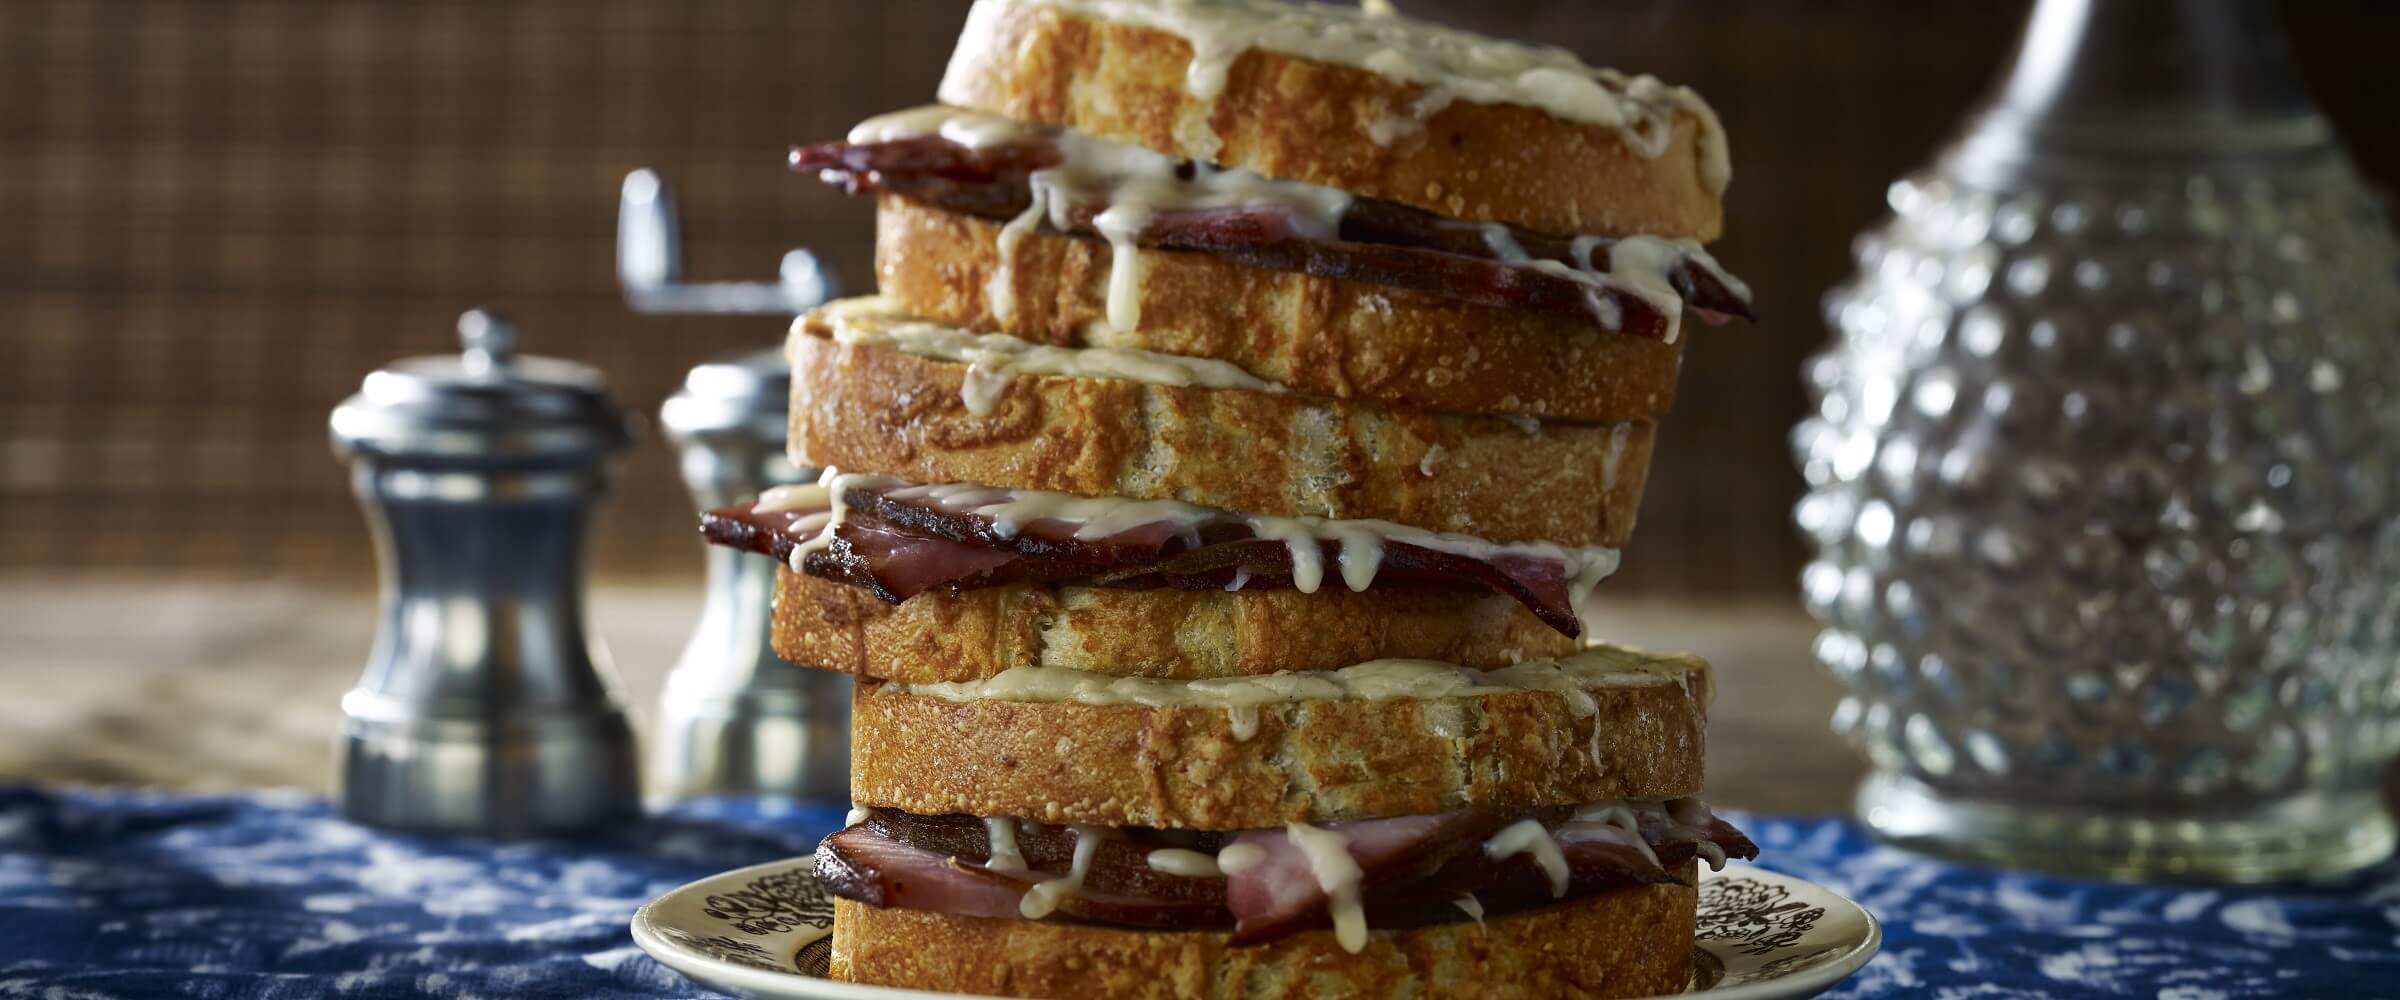 croque monsieur stacked three high with salt and pepper on side